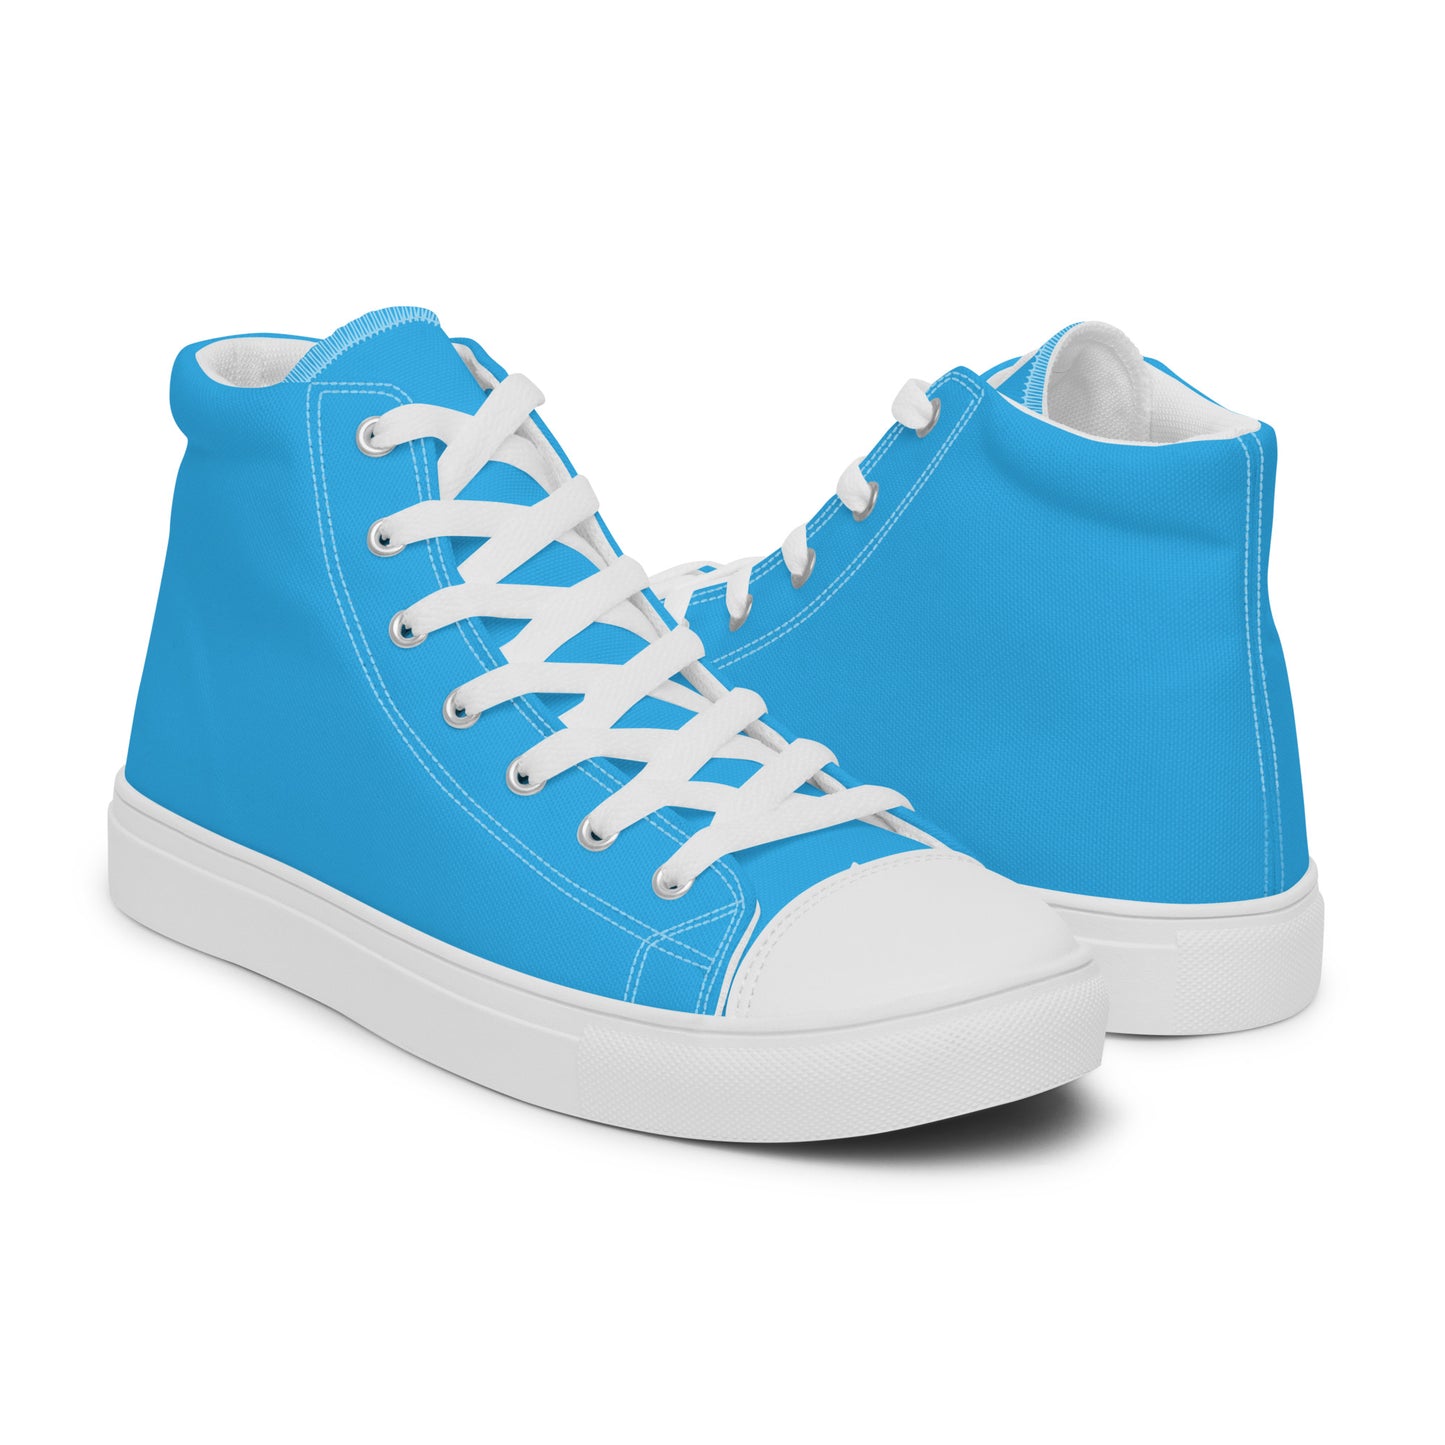 Sky Blue - Sustainably Made Men's High Top Canvas Shoes